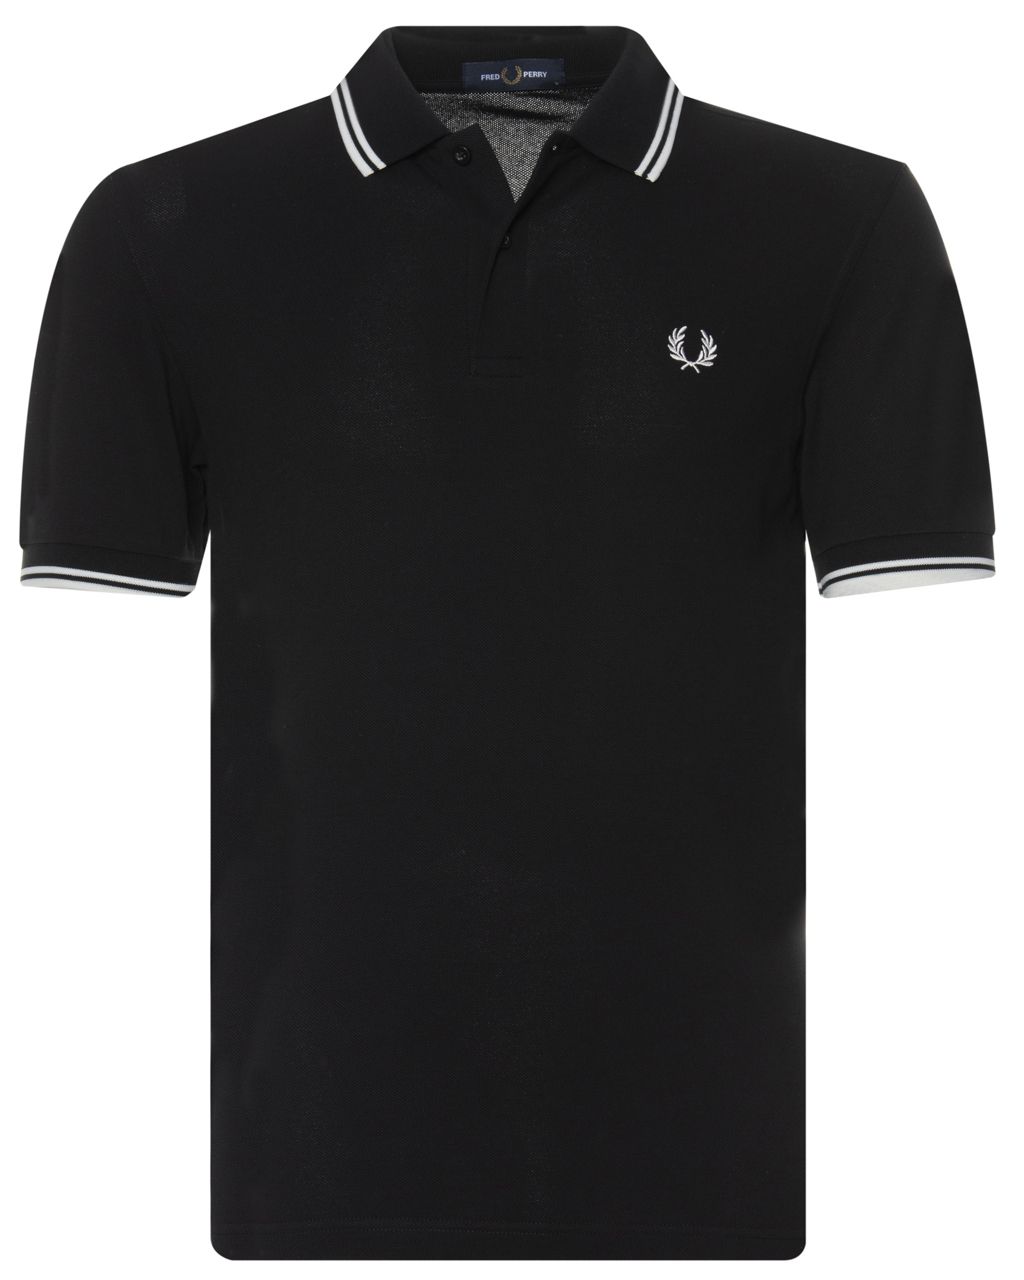 Fred Perry Polo KM Zwart 066654-001-L